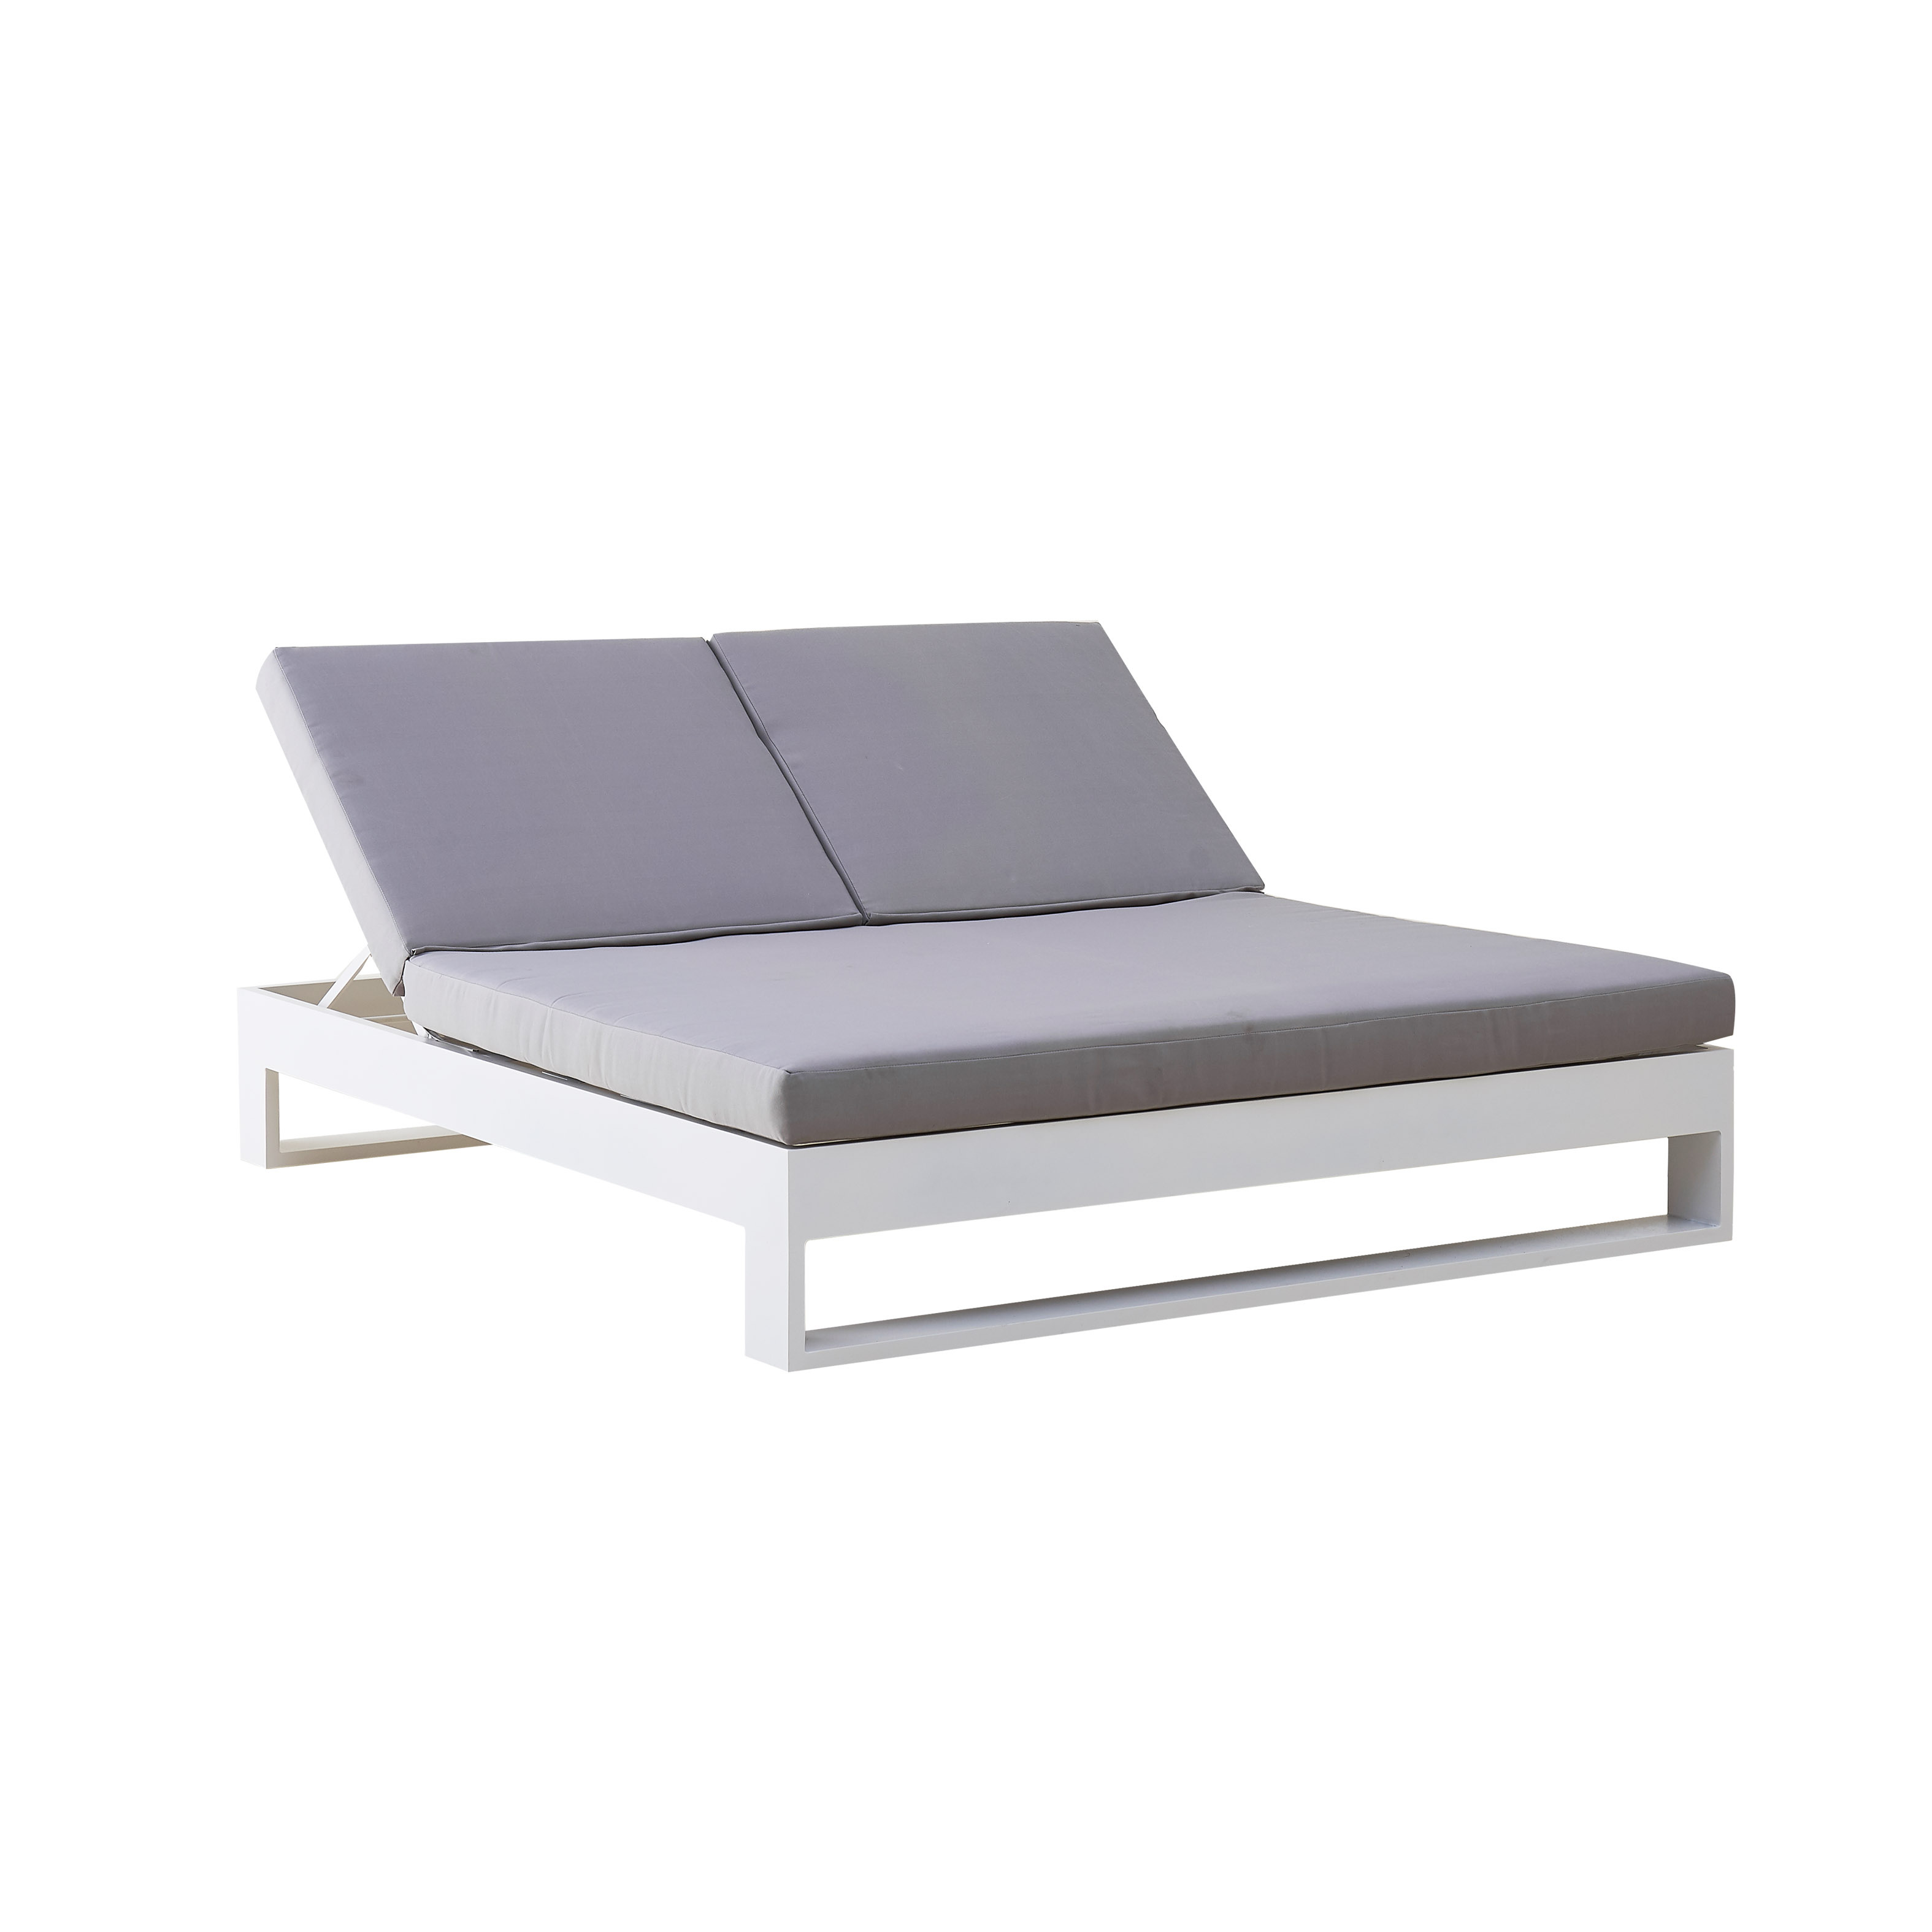 Golf duebel daybed S6